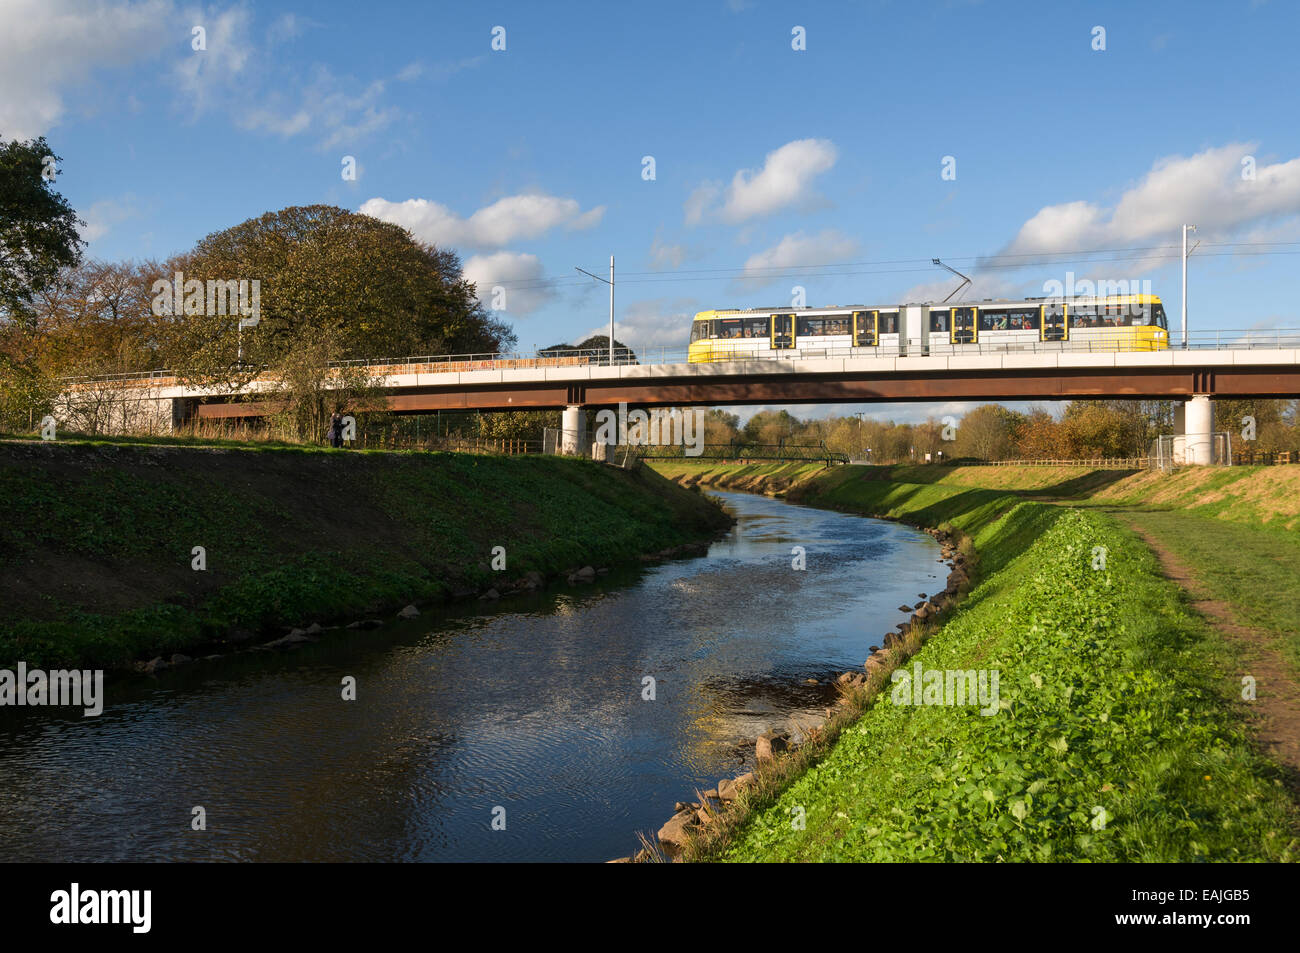 Metrolink tram on the river Mersey viaduct near Jackson's Boat, Airport Line, Manchester, England, UK Stock Photo